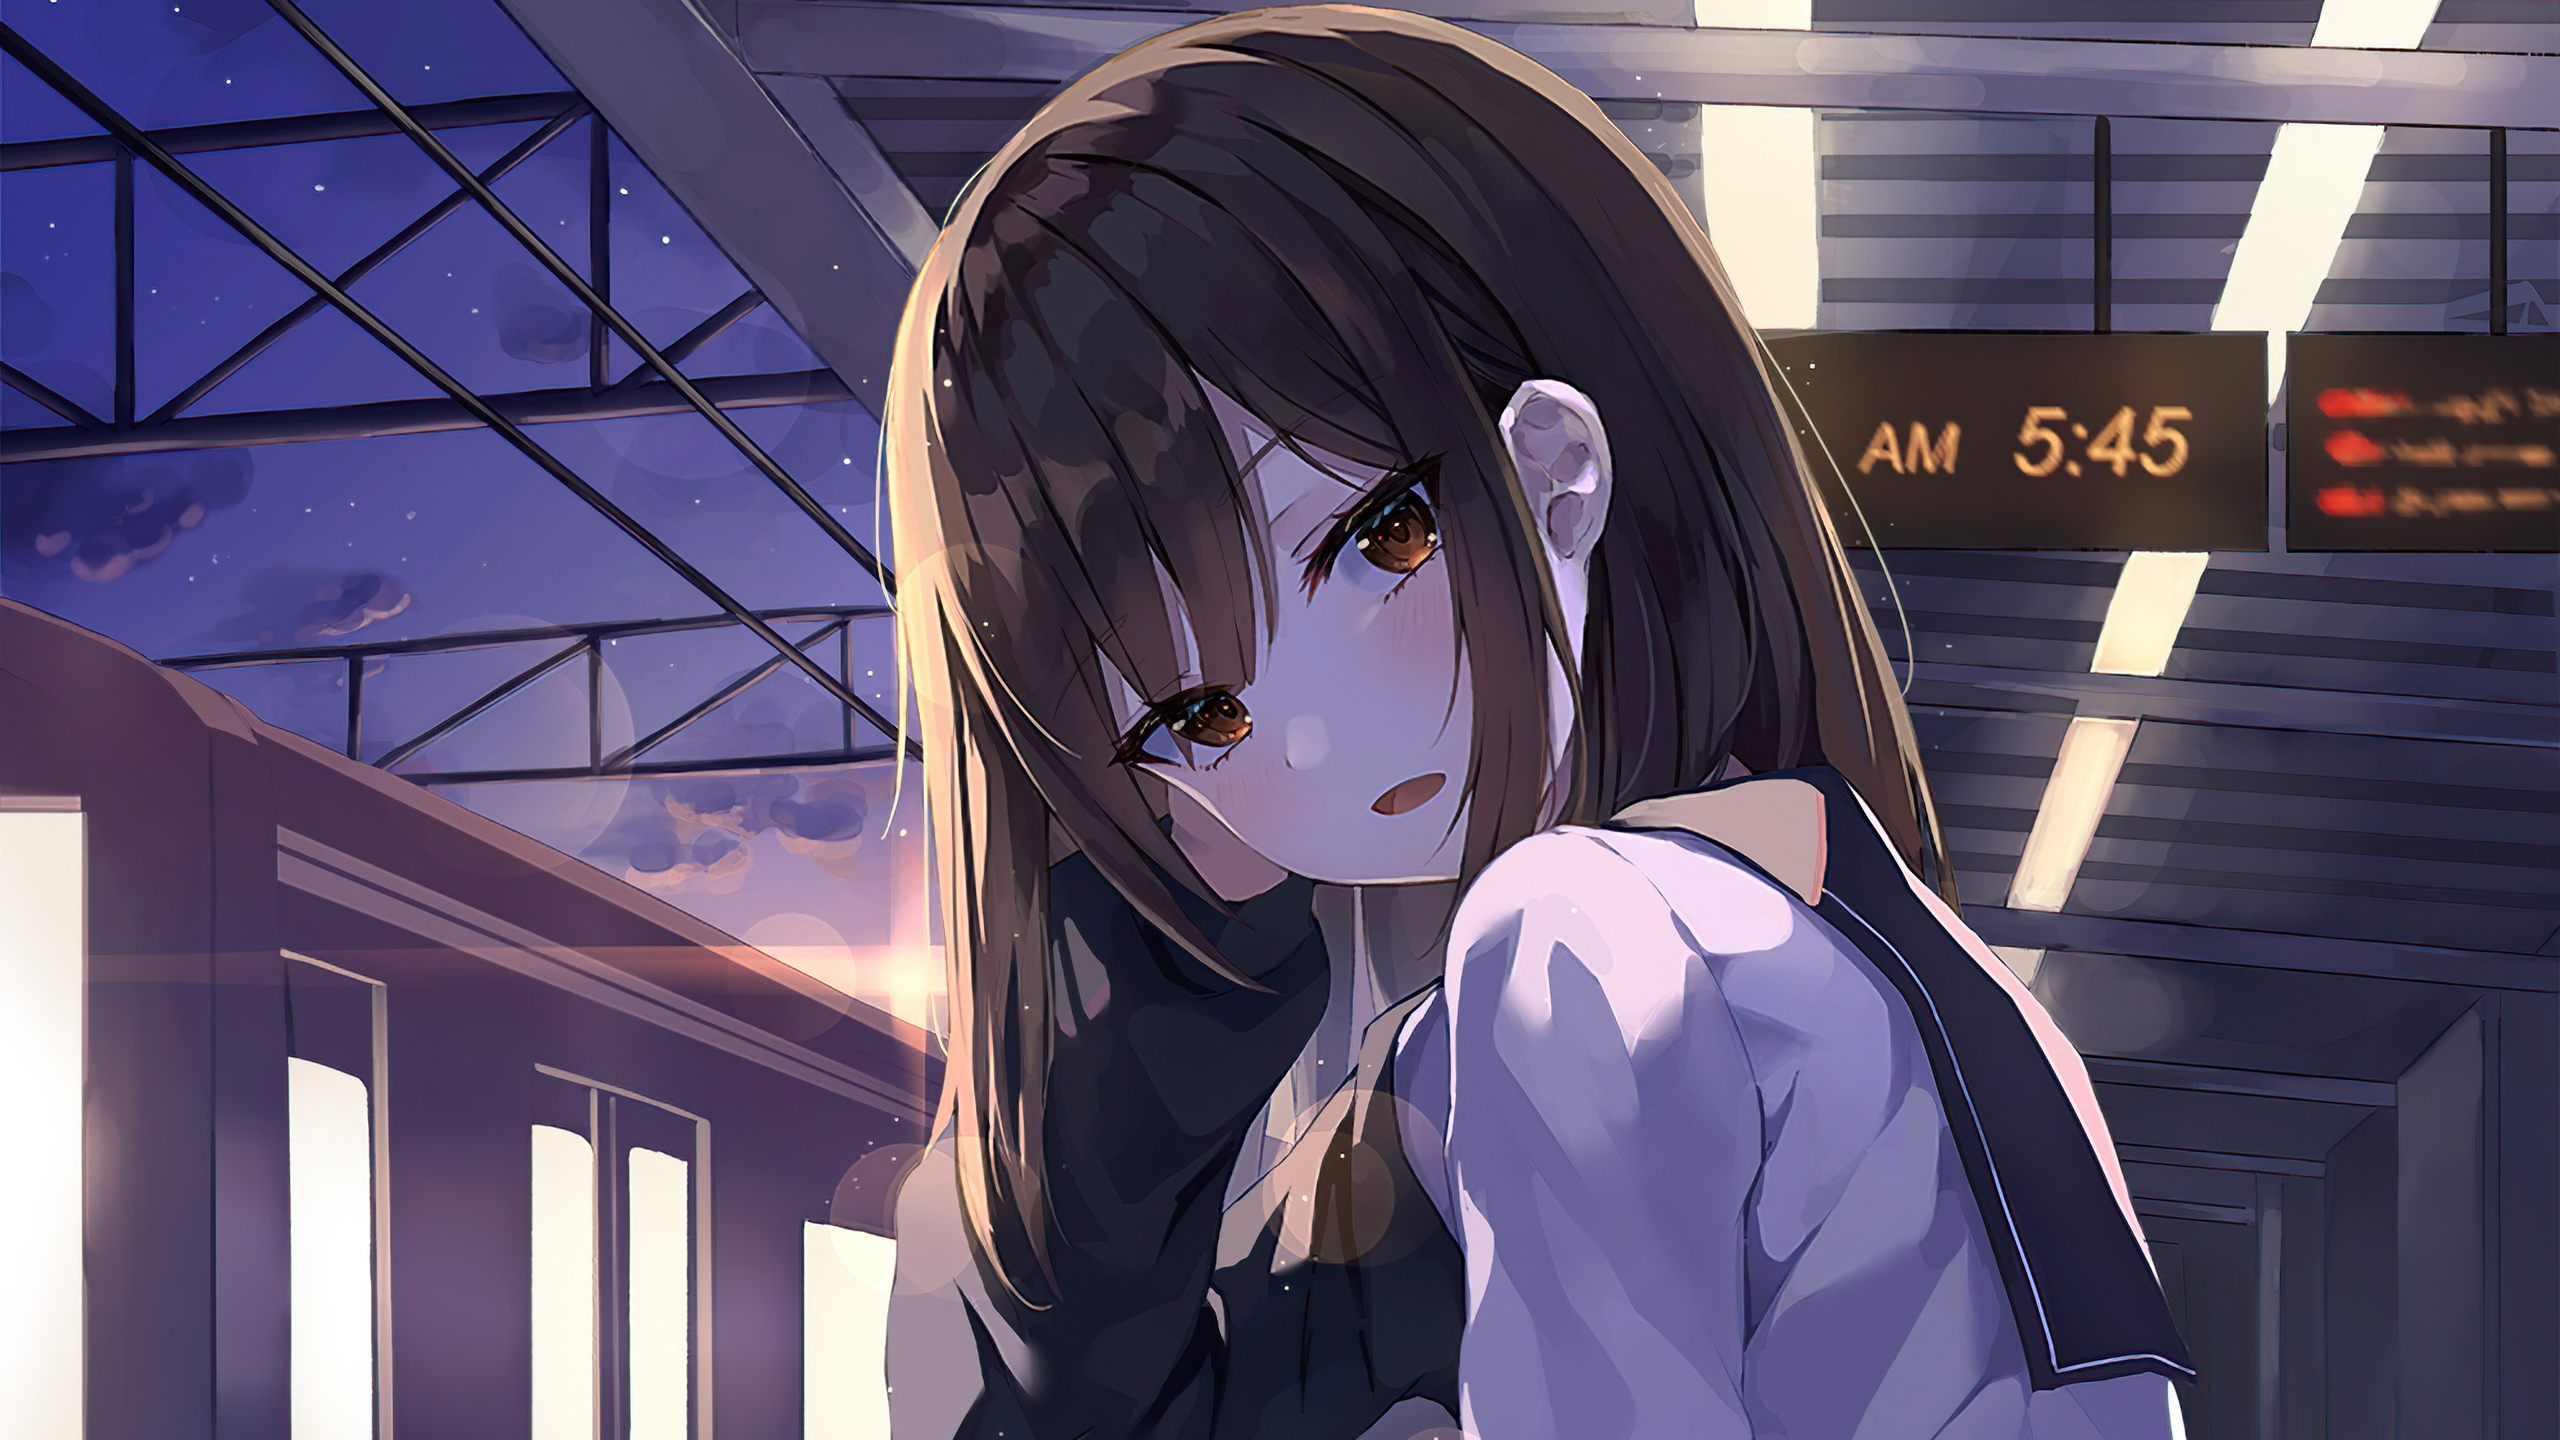 2560x1440 Anime School Girl Sitting In Train Platform 4k 1440P Resolution  HD 4k Wallpapers, Images, Backgrounds, Photos and Pictures